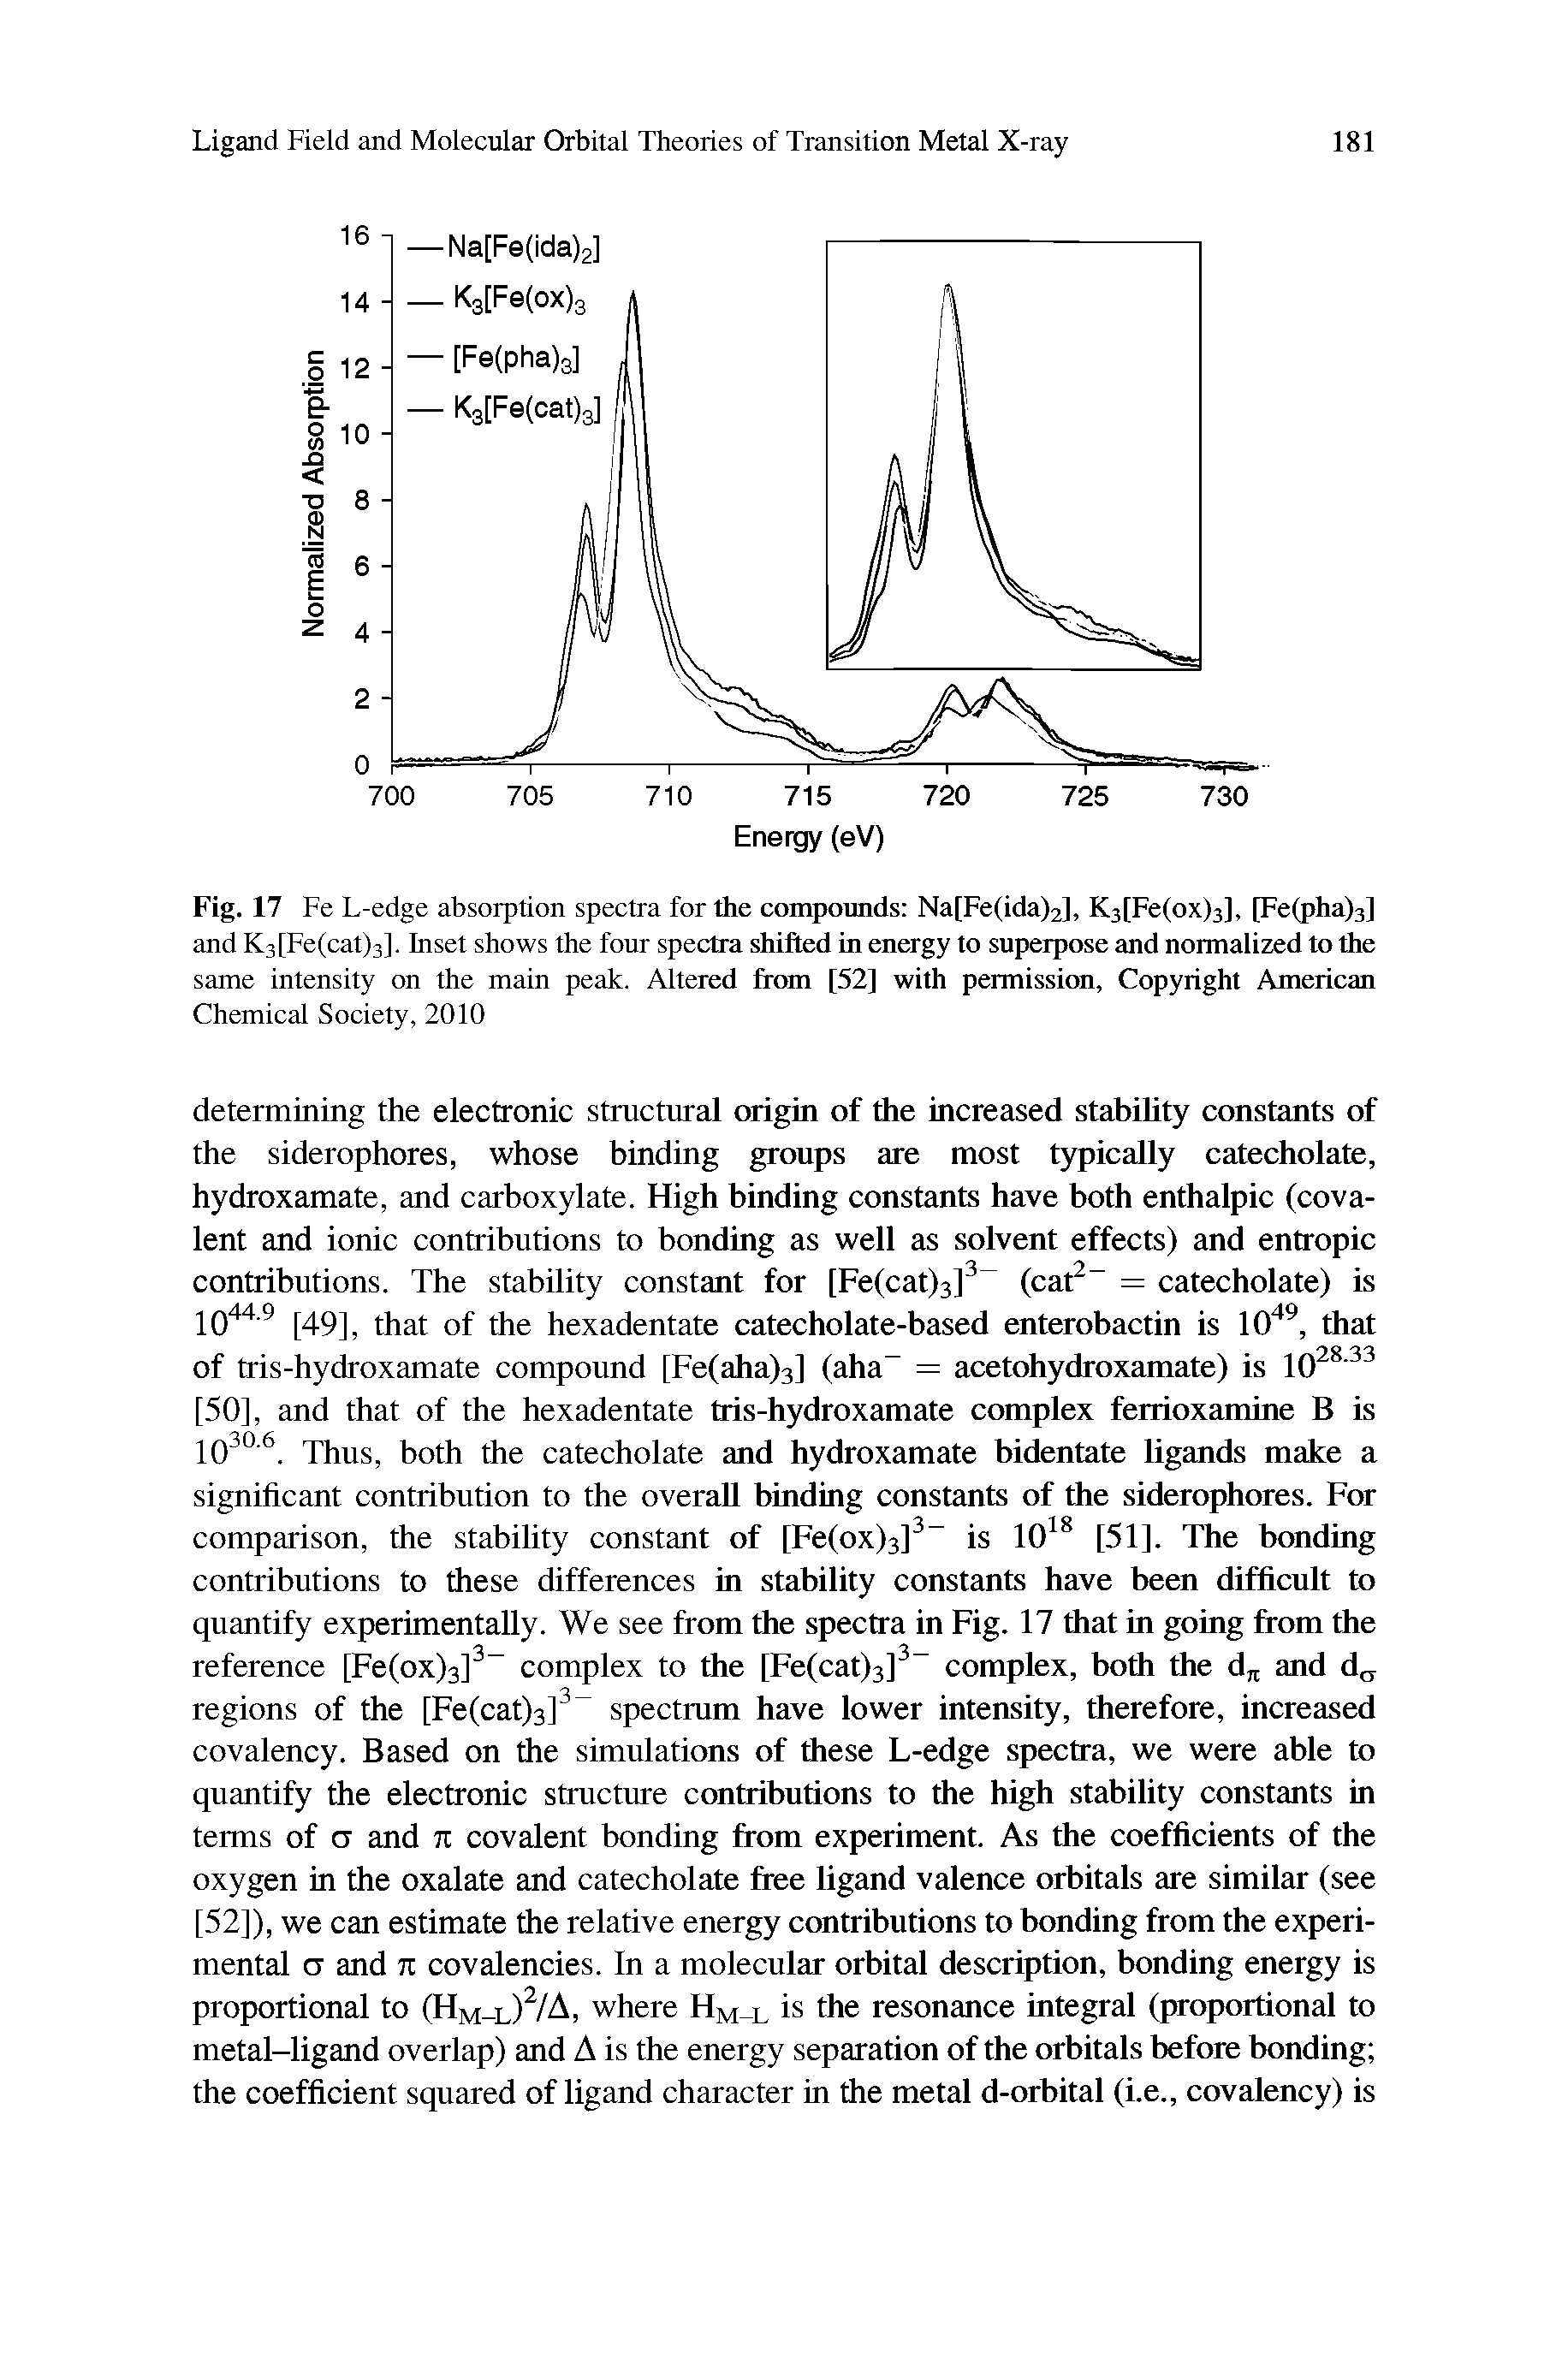 Fig. 17 Fe L-edge absorption spectra for the compounds Na[Fe(ida)2], K3[Fe(ox)3], [Fe(pha)3] and K3[Fe(cat)3], Inset shows the four spectra shifted in energy to superpose and normalized to the same intensity on the main peak. Altered from [52] with permission, Copyright American Chemical Society, 2010...